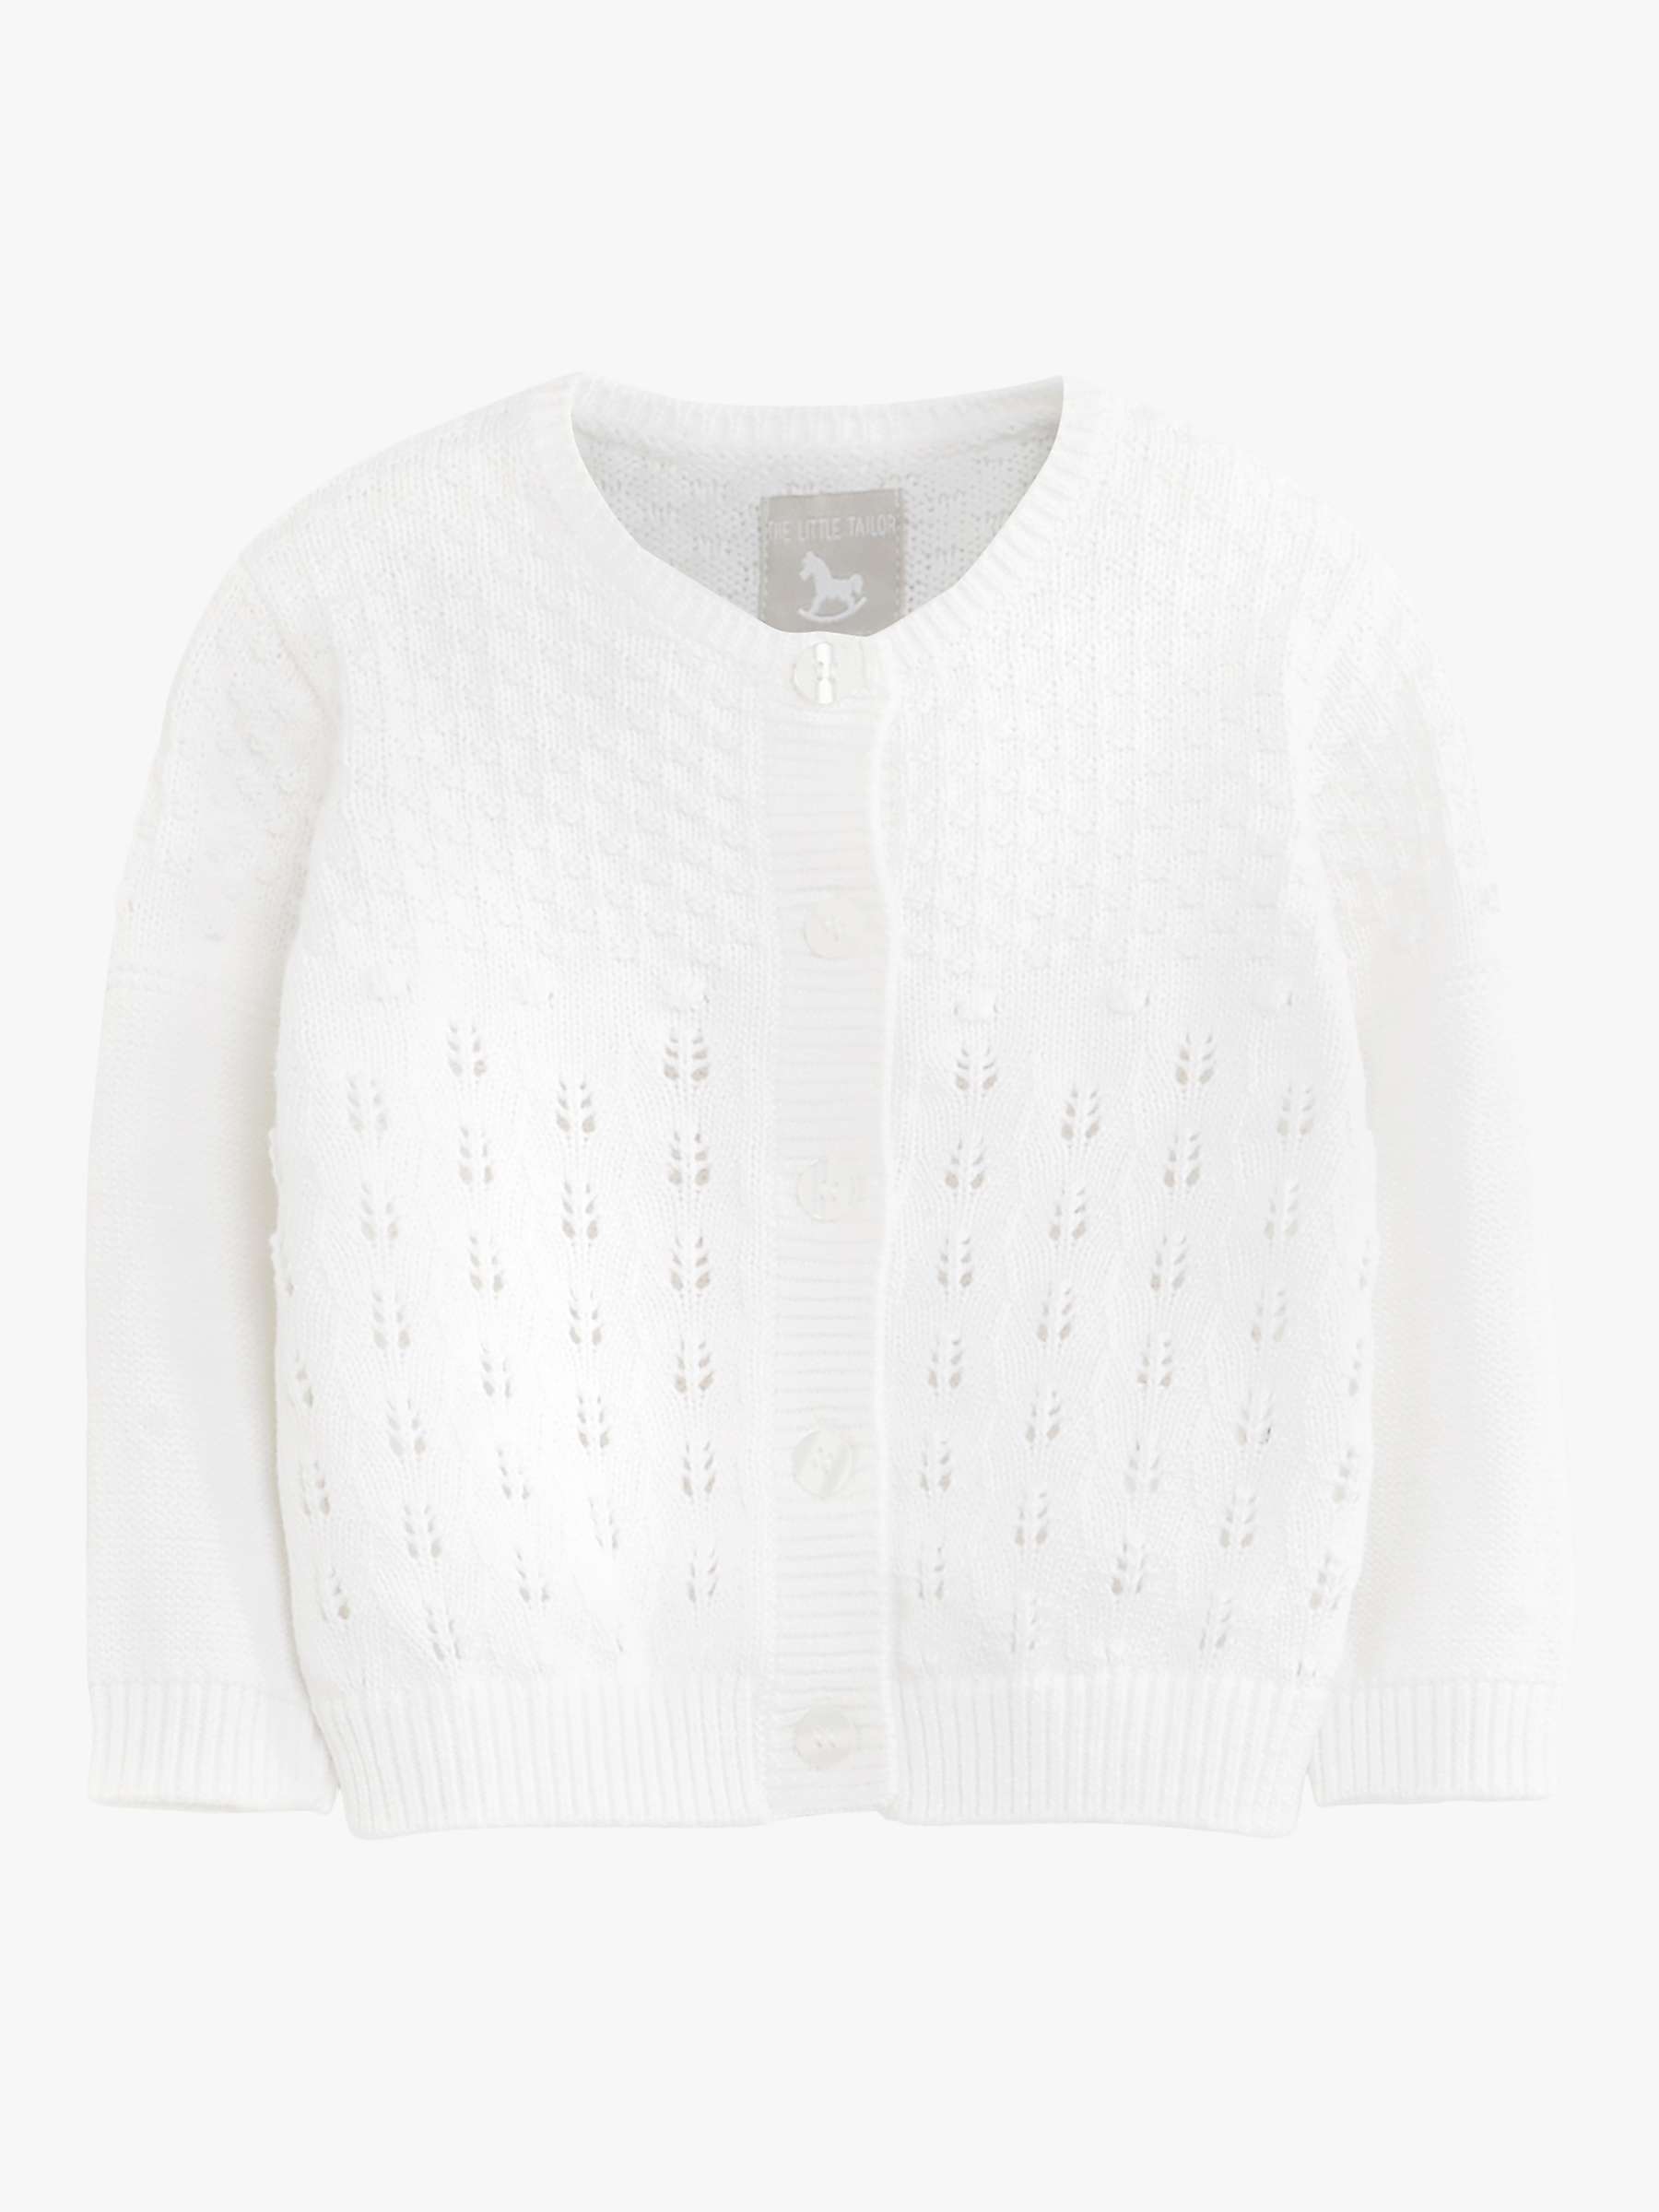 Buy The Little Tailor Baby Pointelle Knit Cardigan Online at johnlewis.com